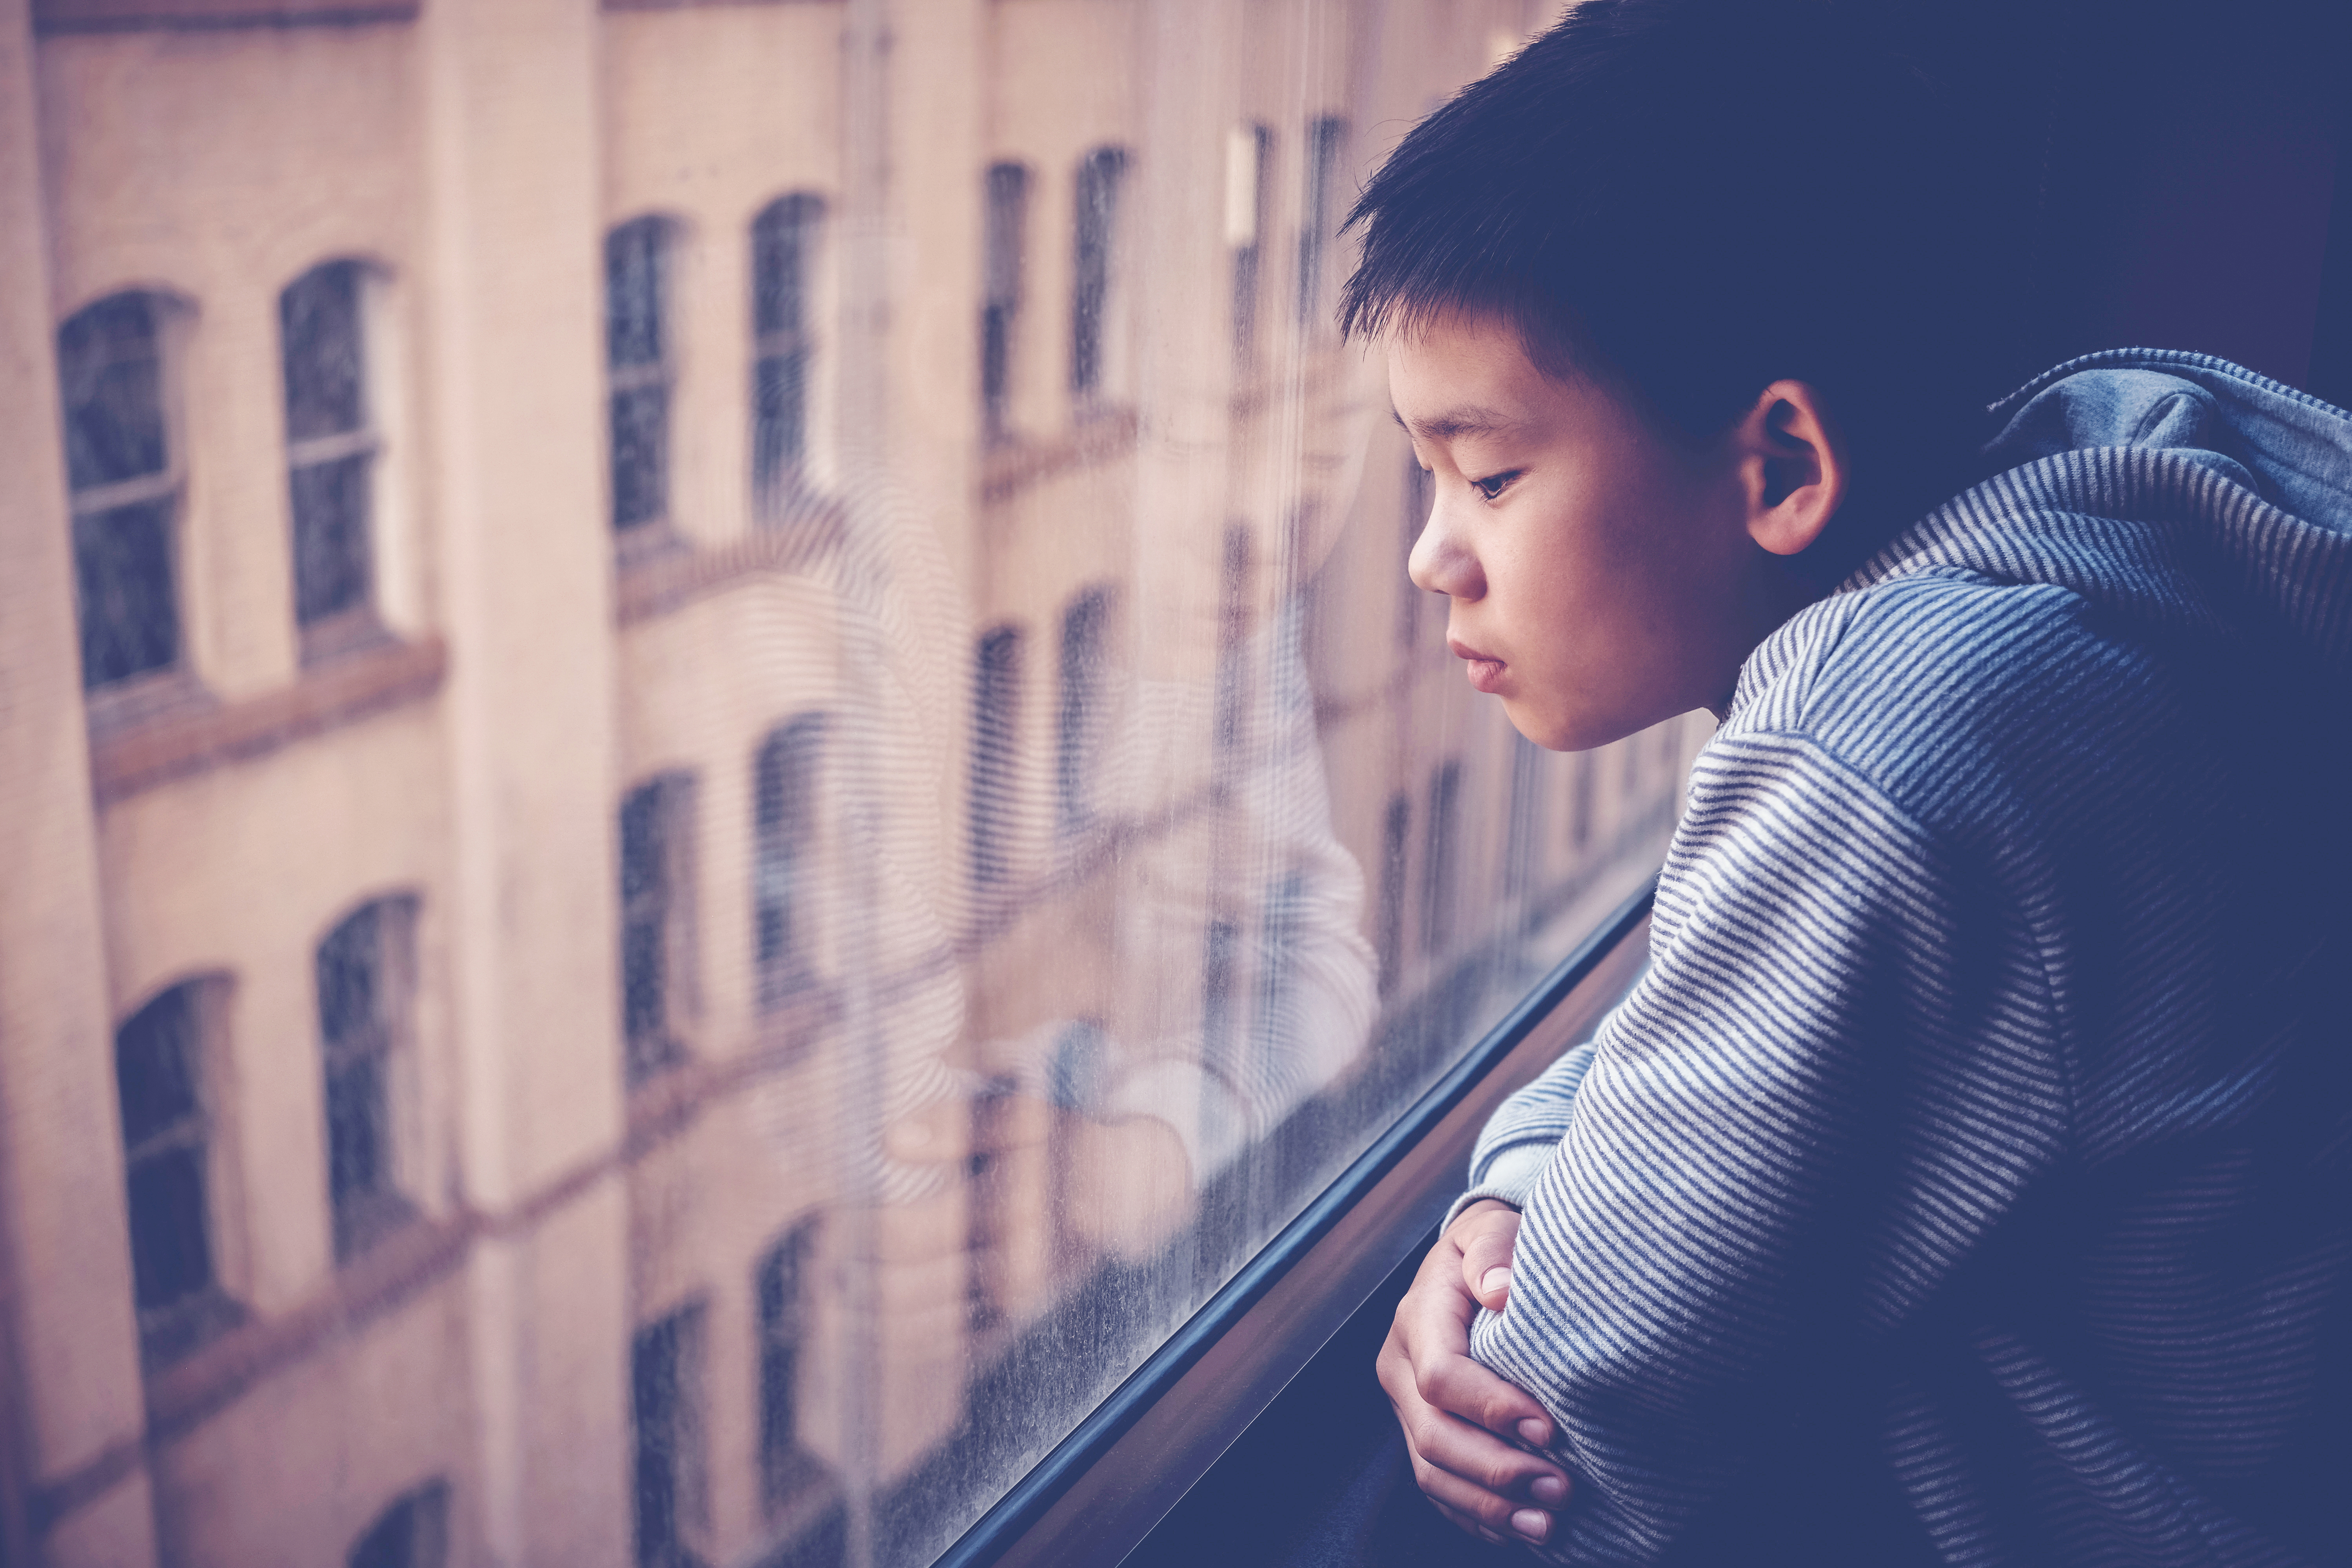 A young boy sits staring out of a window